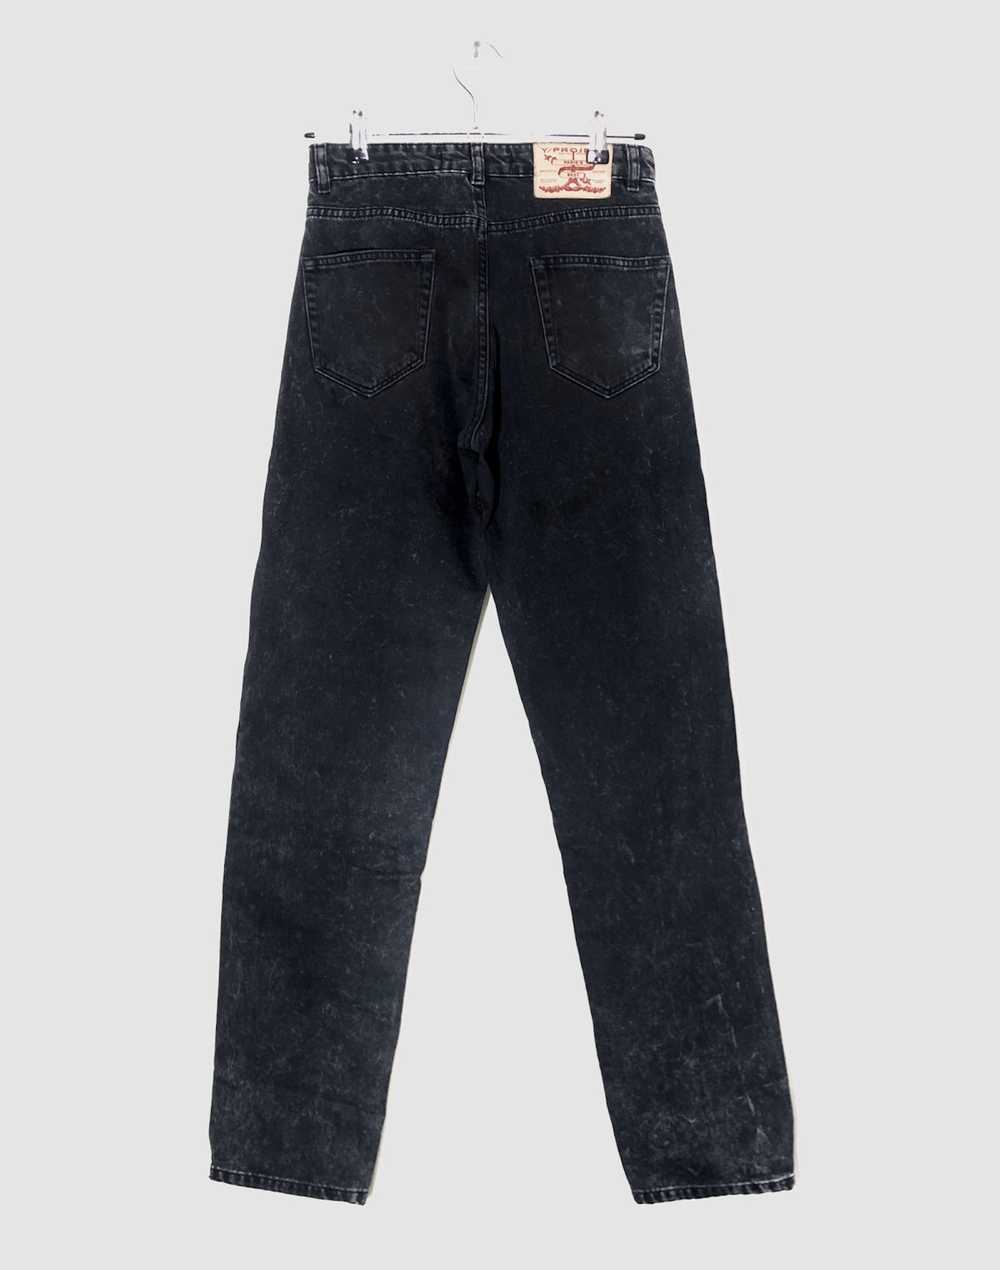 Y/Project Y/Project layer jeans - image 2